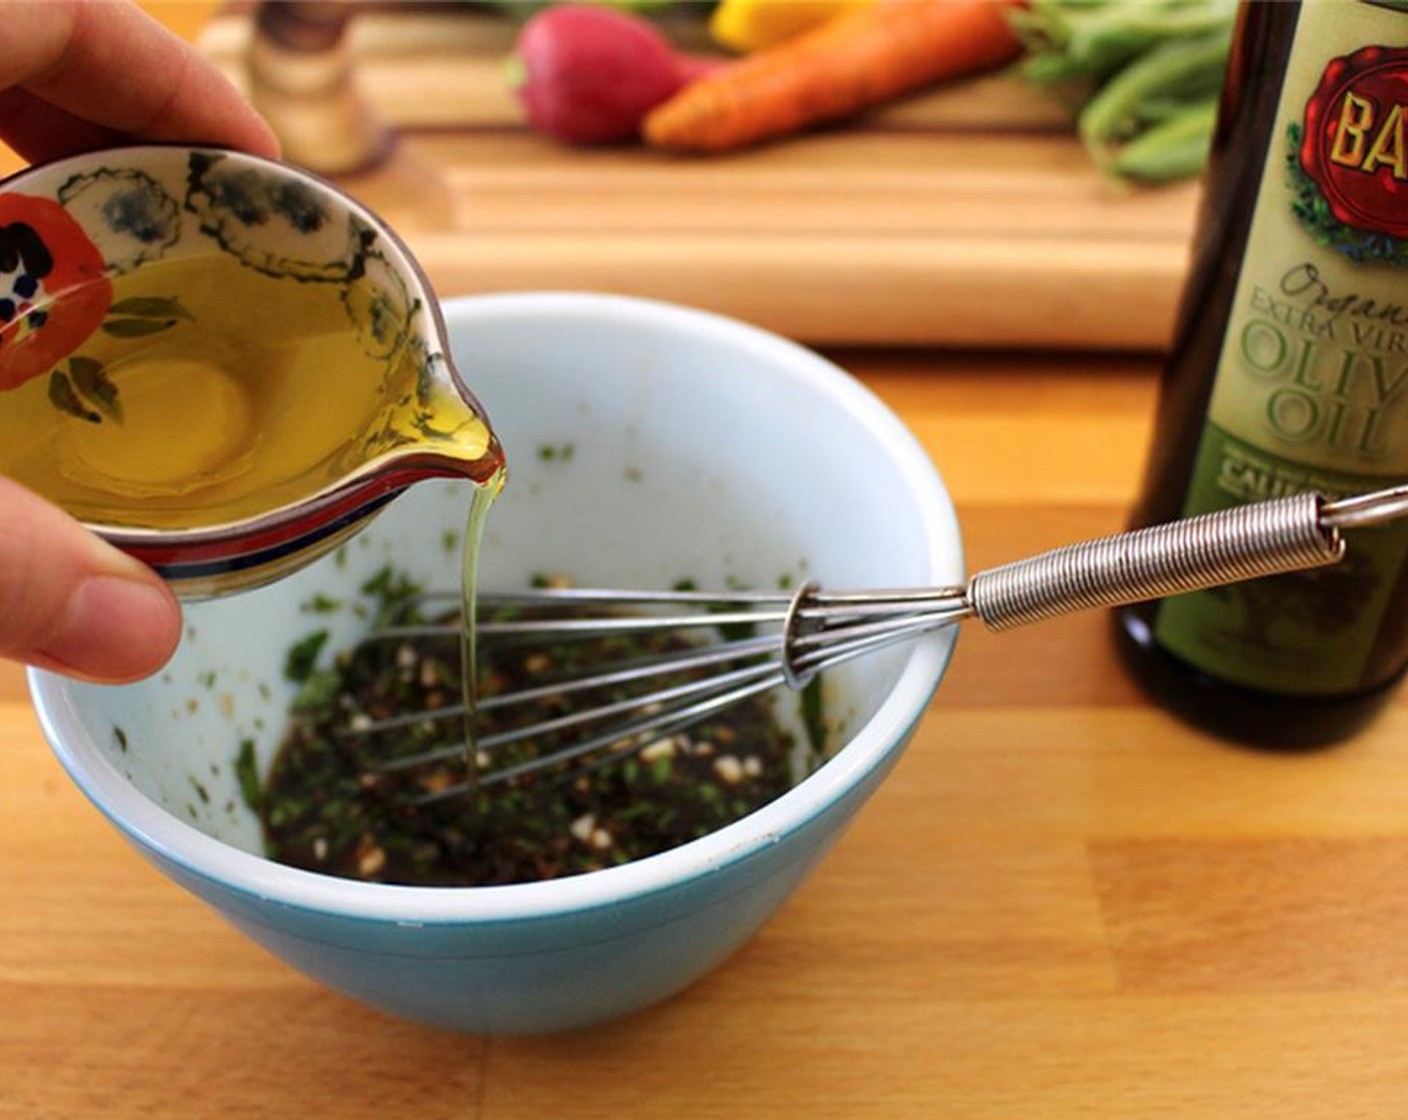 step 4 Whisk Balsamic Vinegar (1/4 cup), Dijon Mustard (1/2 Tbsp), Garlic (2 cloves), and Cayenne Pepper (1 pinch). Stream in Olive Oil (2 Tbsp) as you whisk. Taste and adjust seasoning if desired.